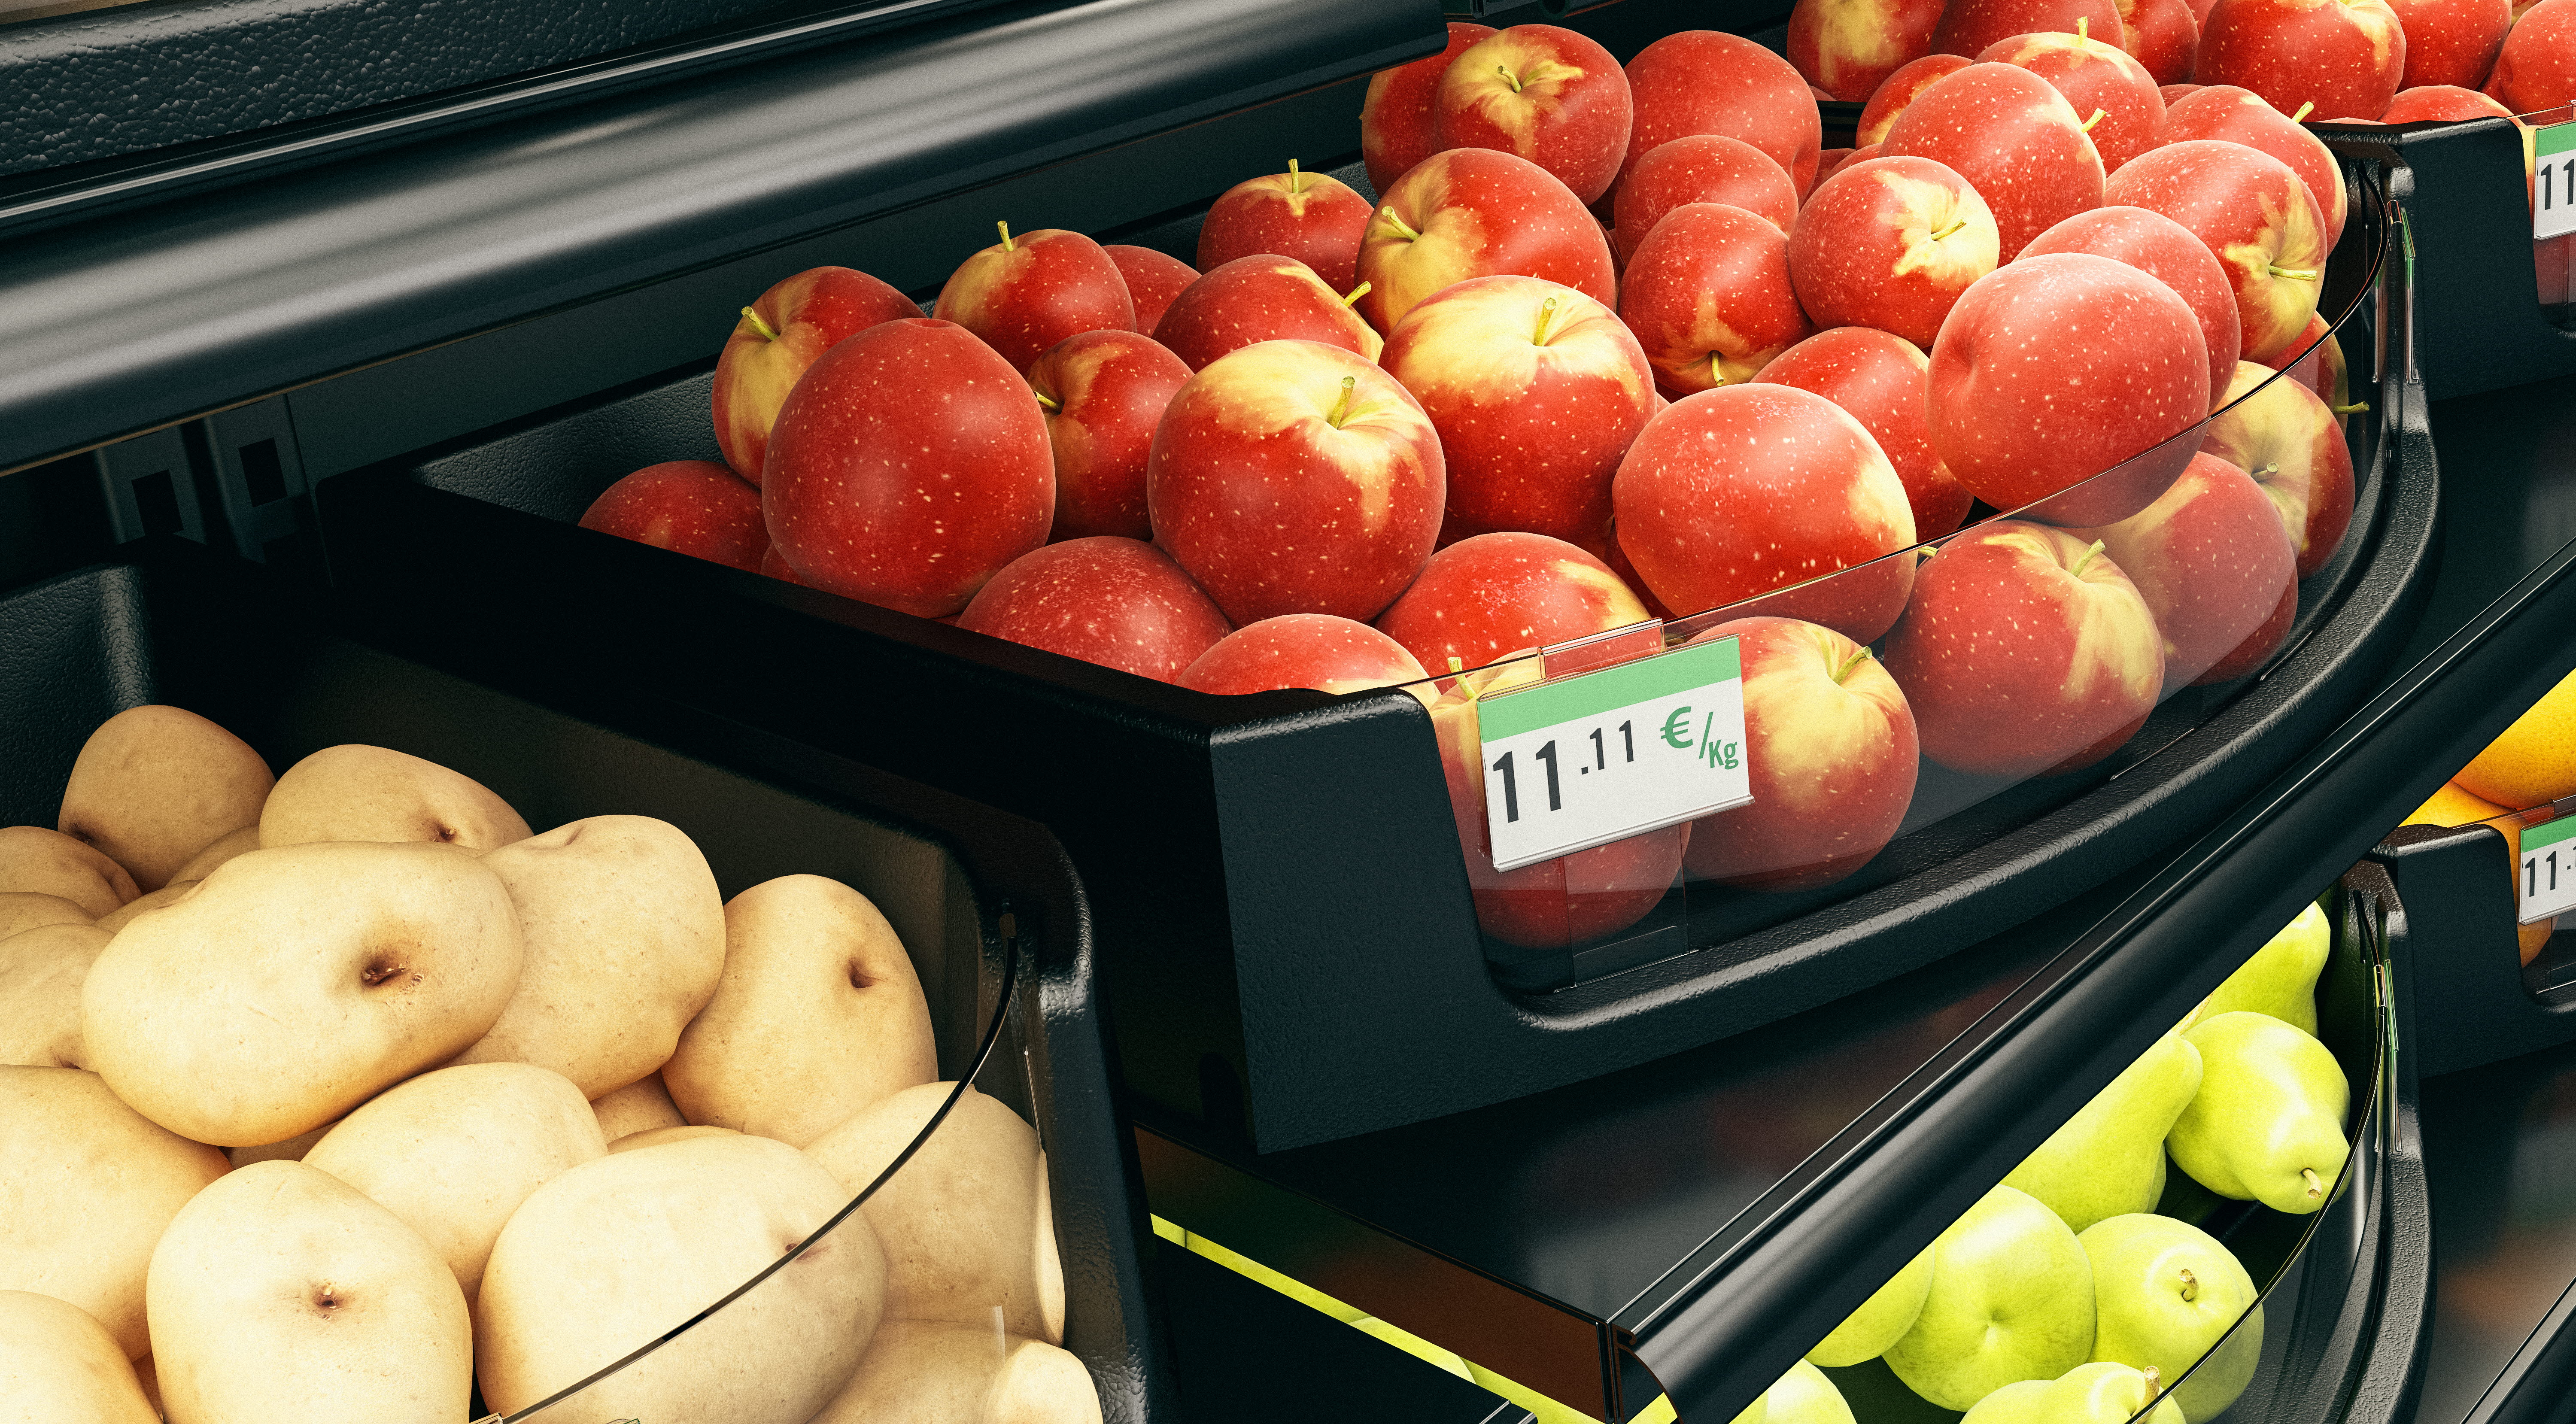 Attract shoppers with superior fresh produce